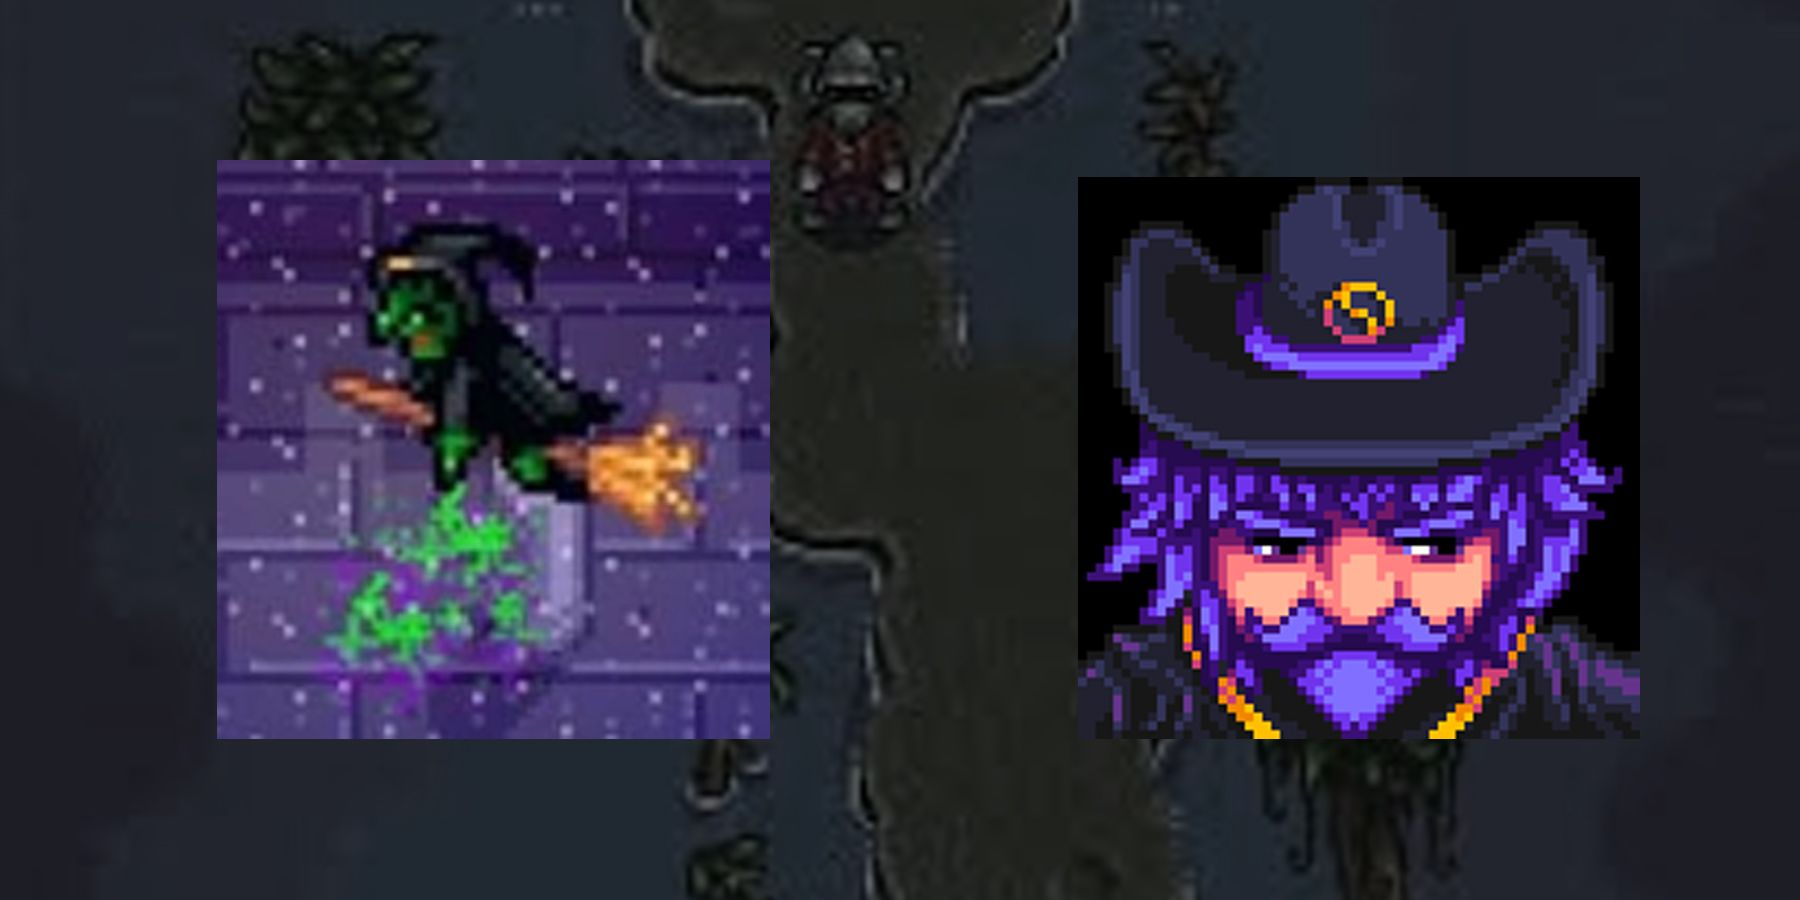 The Witch and the Wizard in Stardew Valley